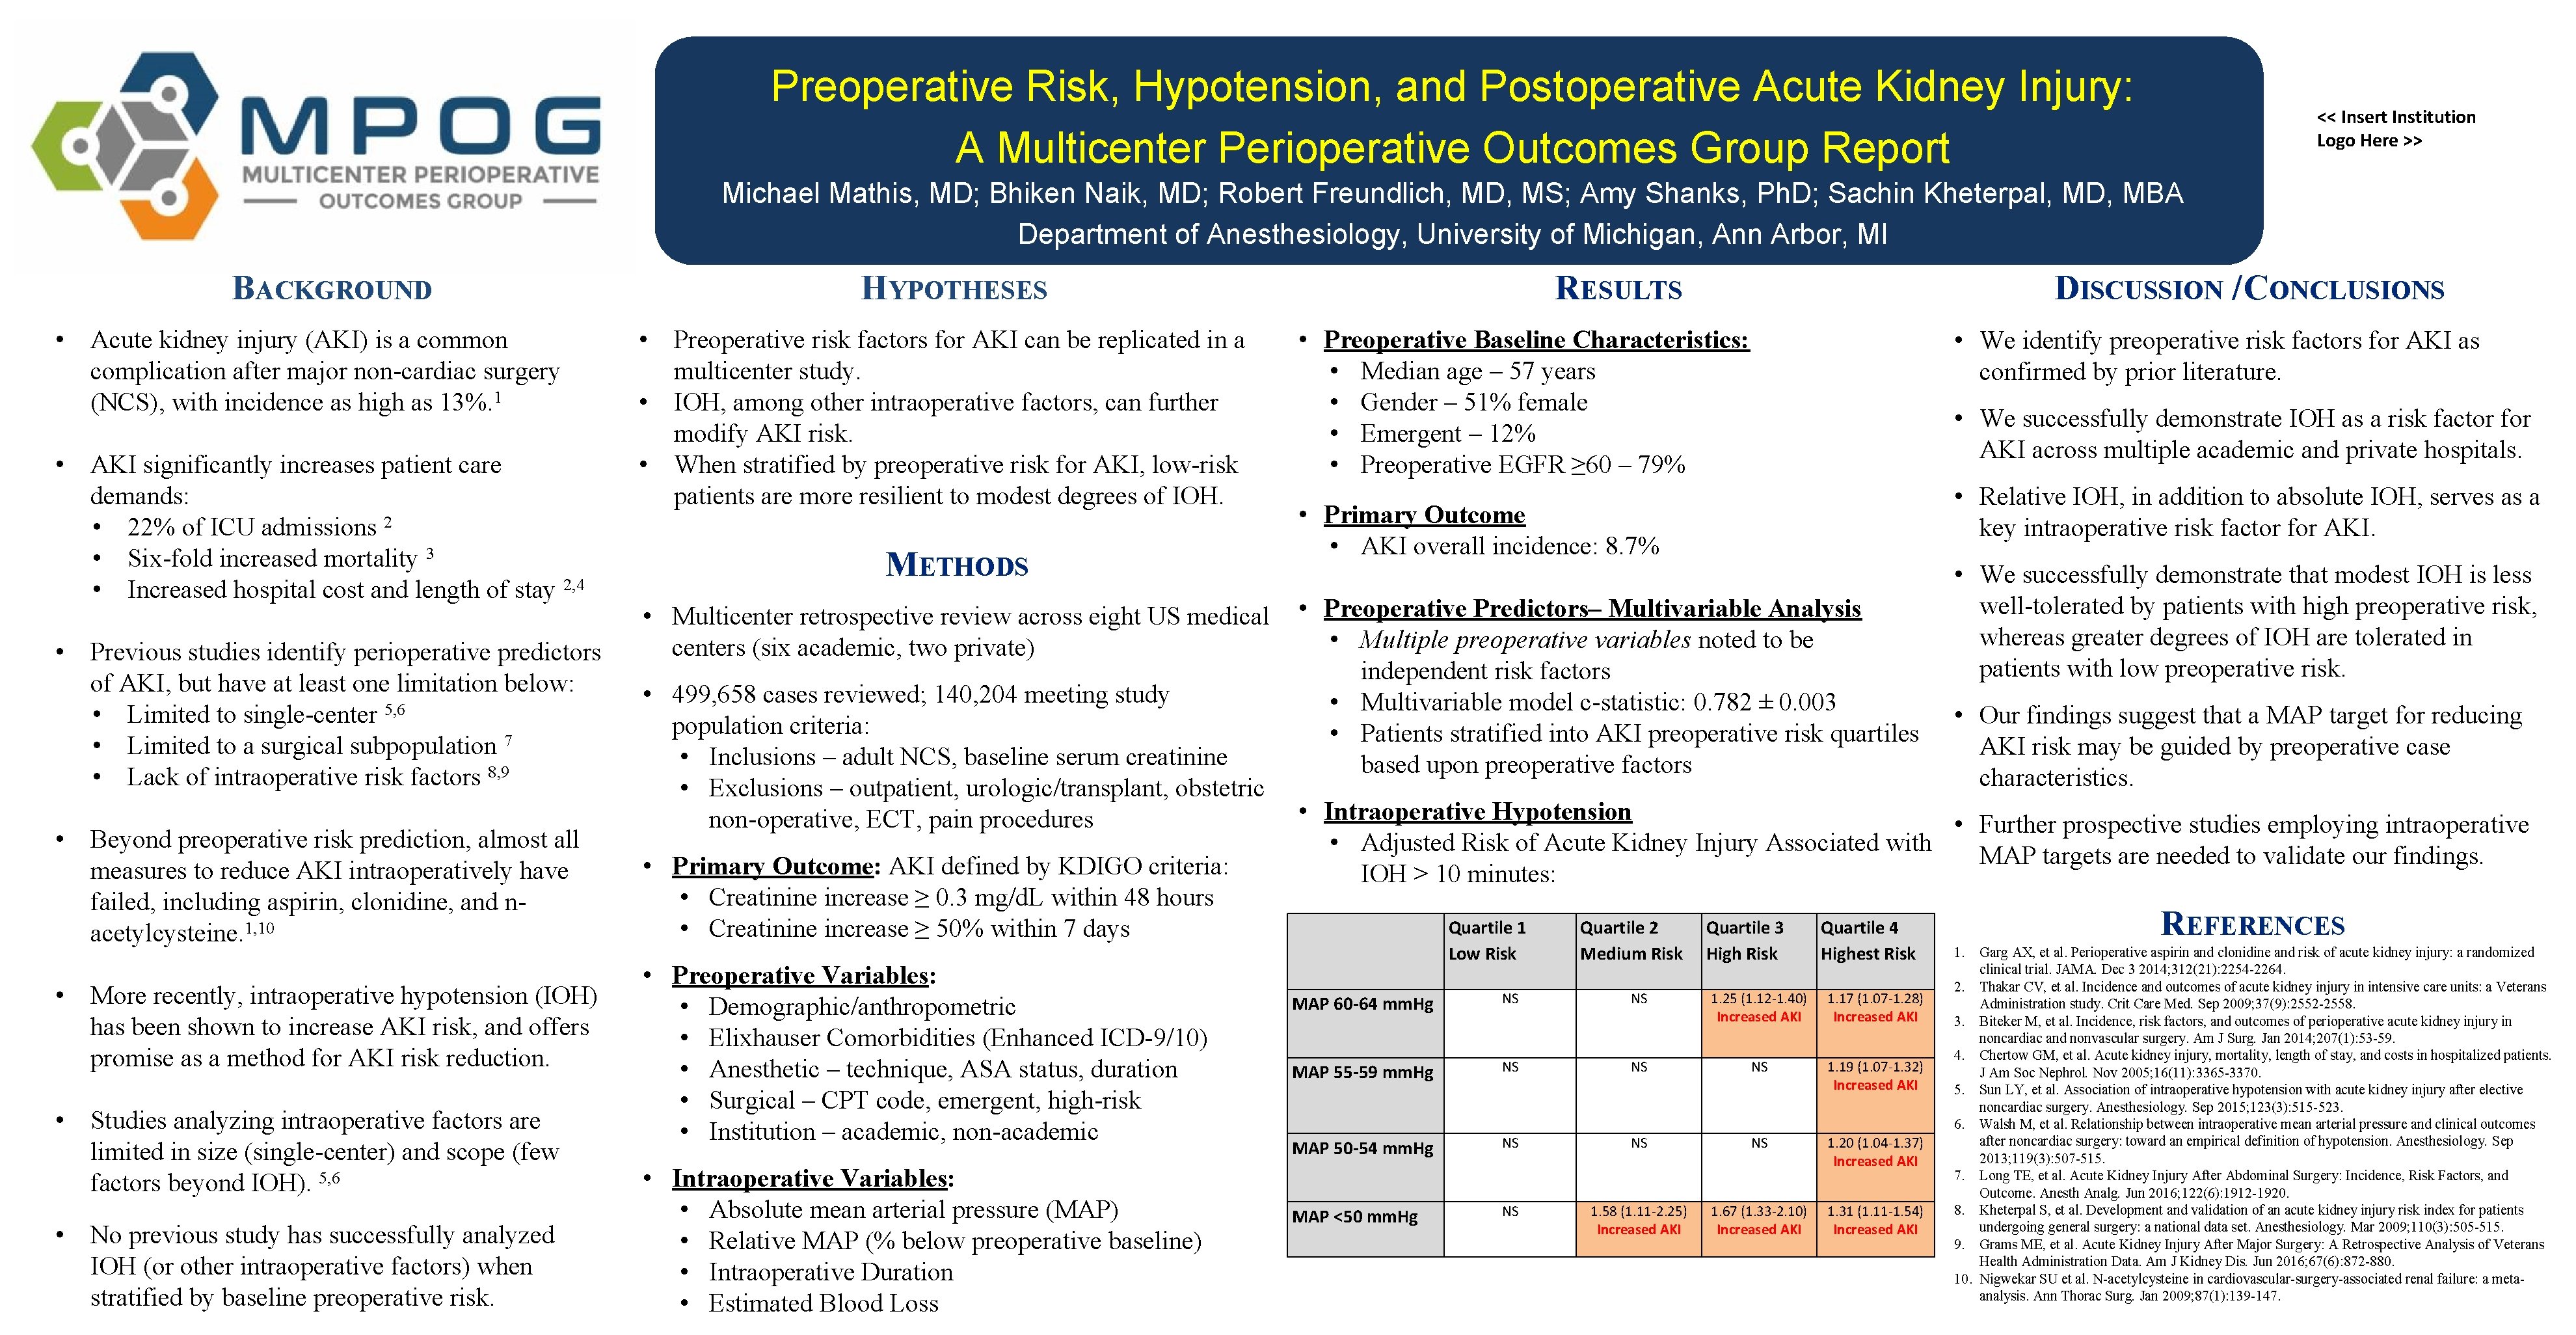 Preoperative Risk, Hypotension, and Postoperative Acute Kidney Injury: A Multicenter Perioperative Outcomes Group Report